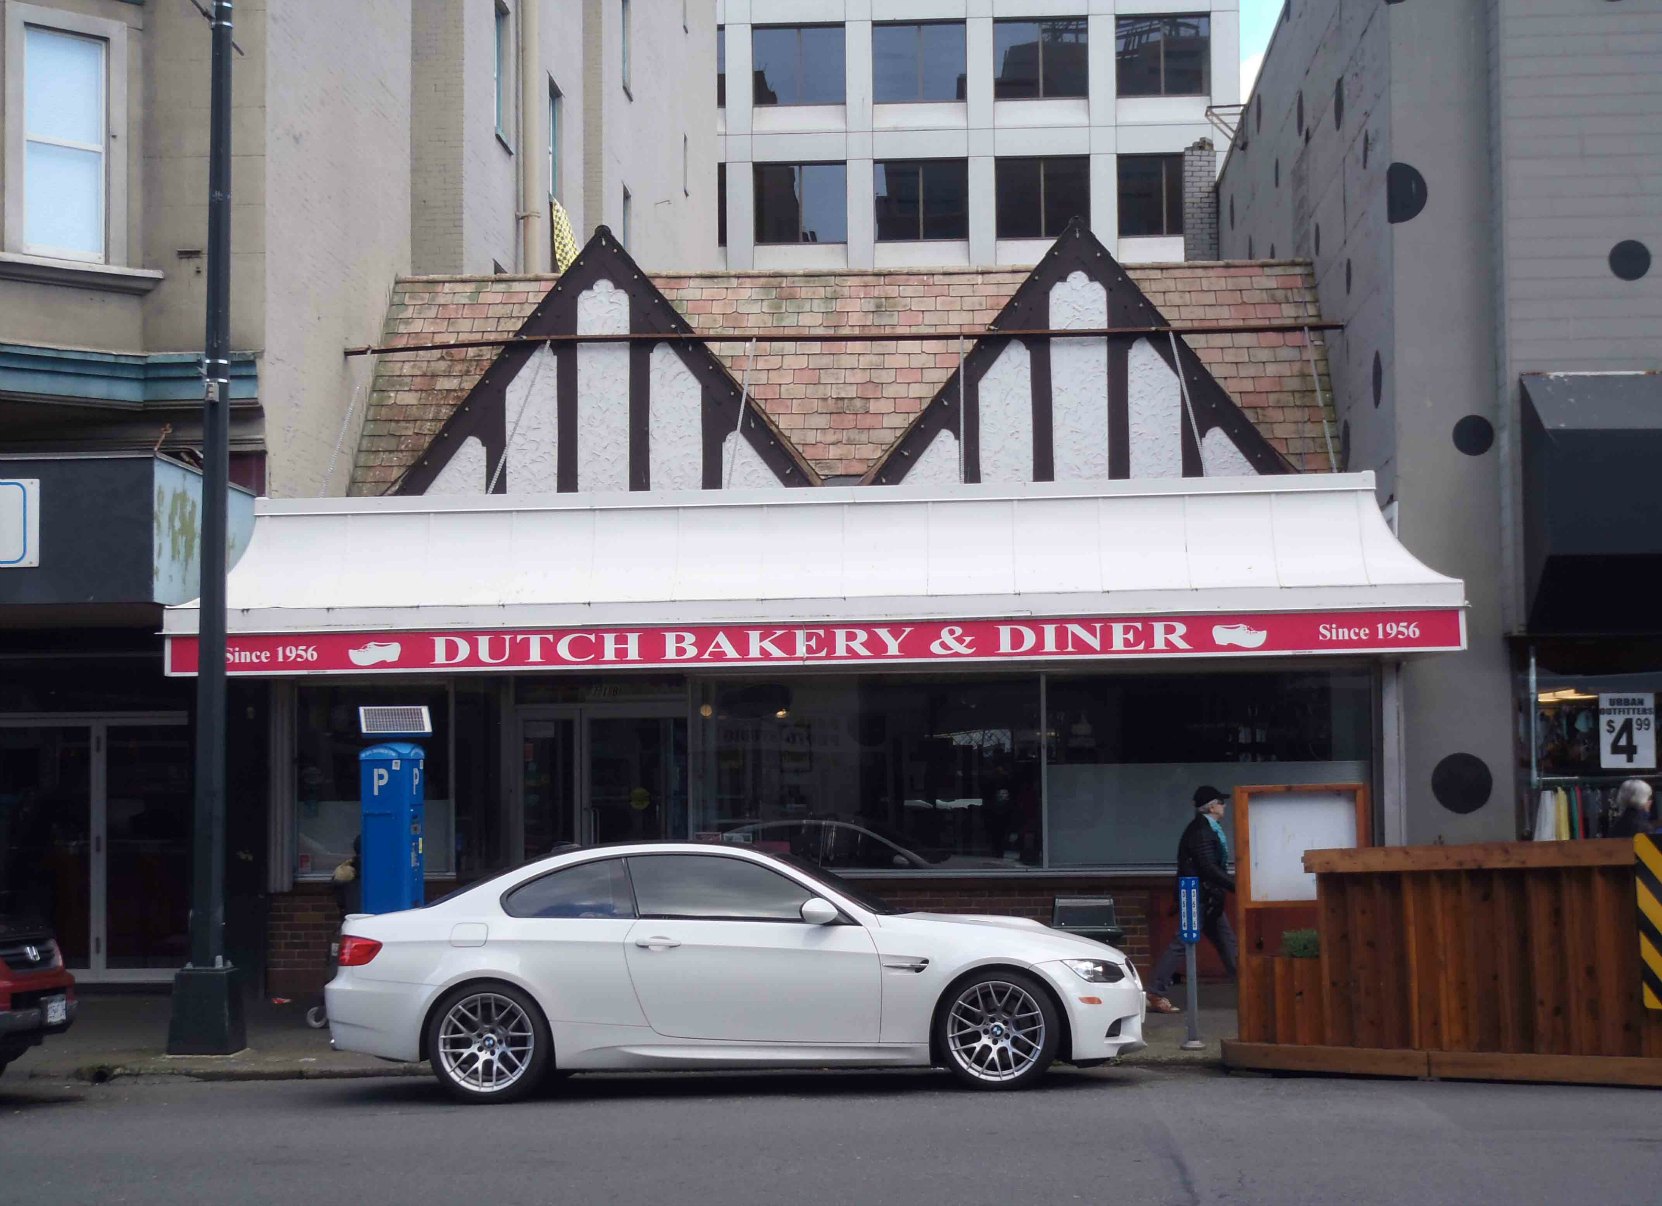 The Dutch Bakery & Diner, 718 Fort Street (photo by Victoria Online Sightseeing Tours)